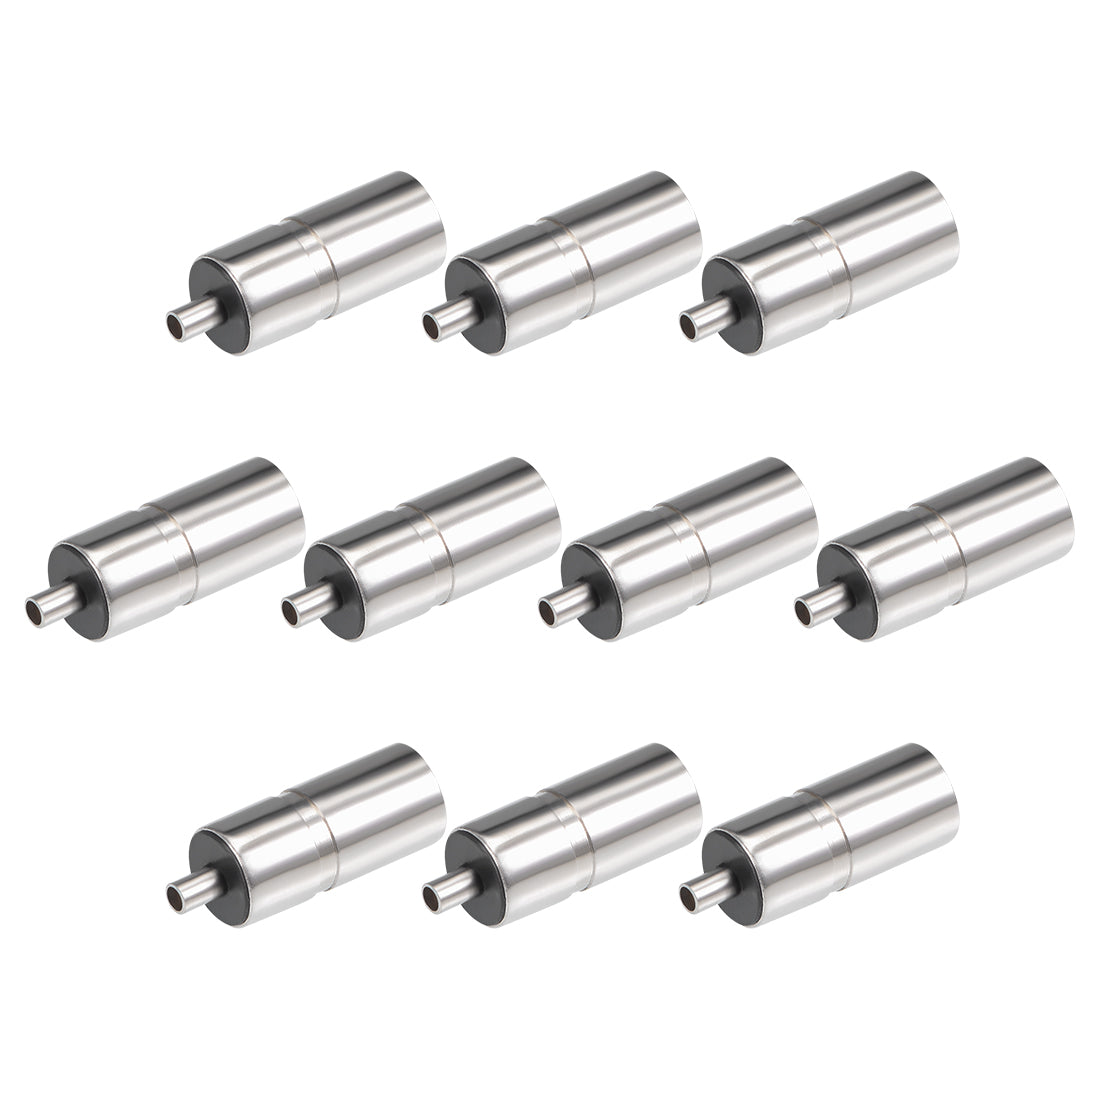 uxcell Uxcell 10Pcs DC Female Connector 3.5mm x 1.35mm Power Cable Jack Adapter Silver Tone